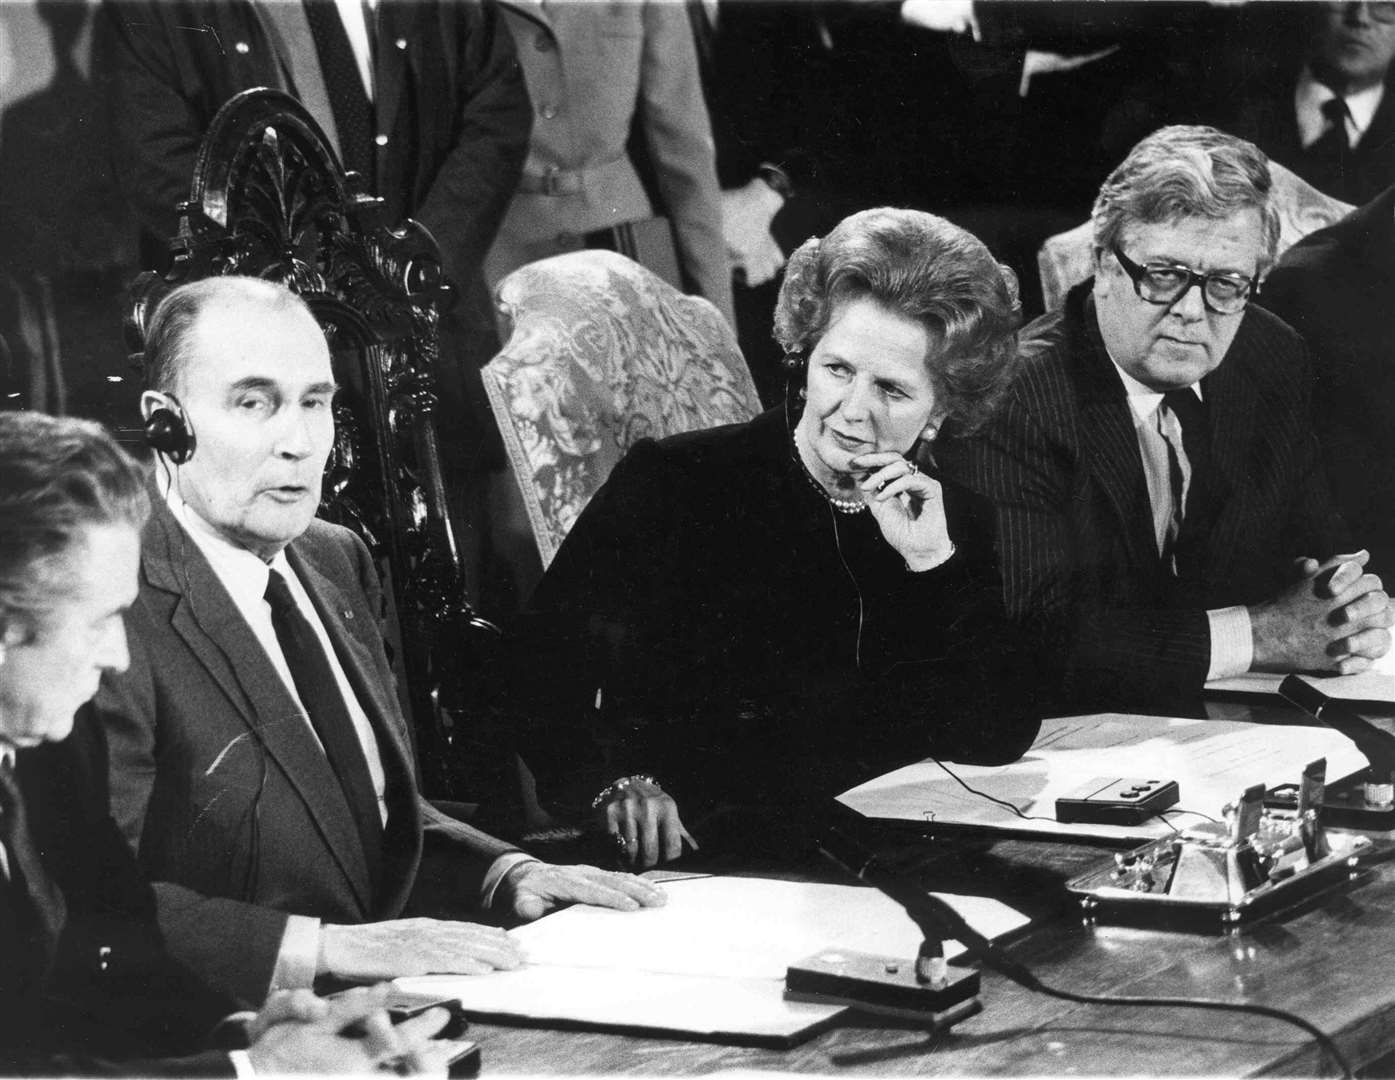 Prime Minister Margaret Thatcher and President Francois Mitterand sign the Channel Tunnel treaty at a special ceremony at Canterbury Cathedral in February 1986. Protesters made their feelings known by throwing eggs